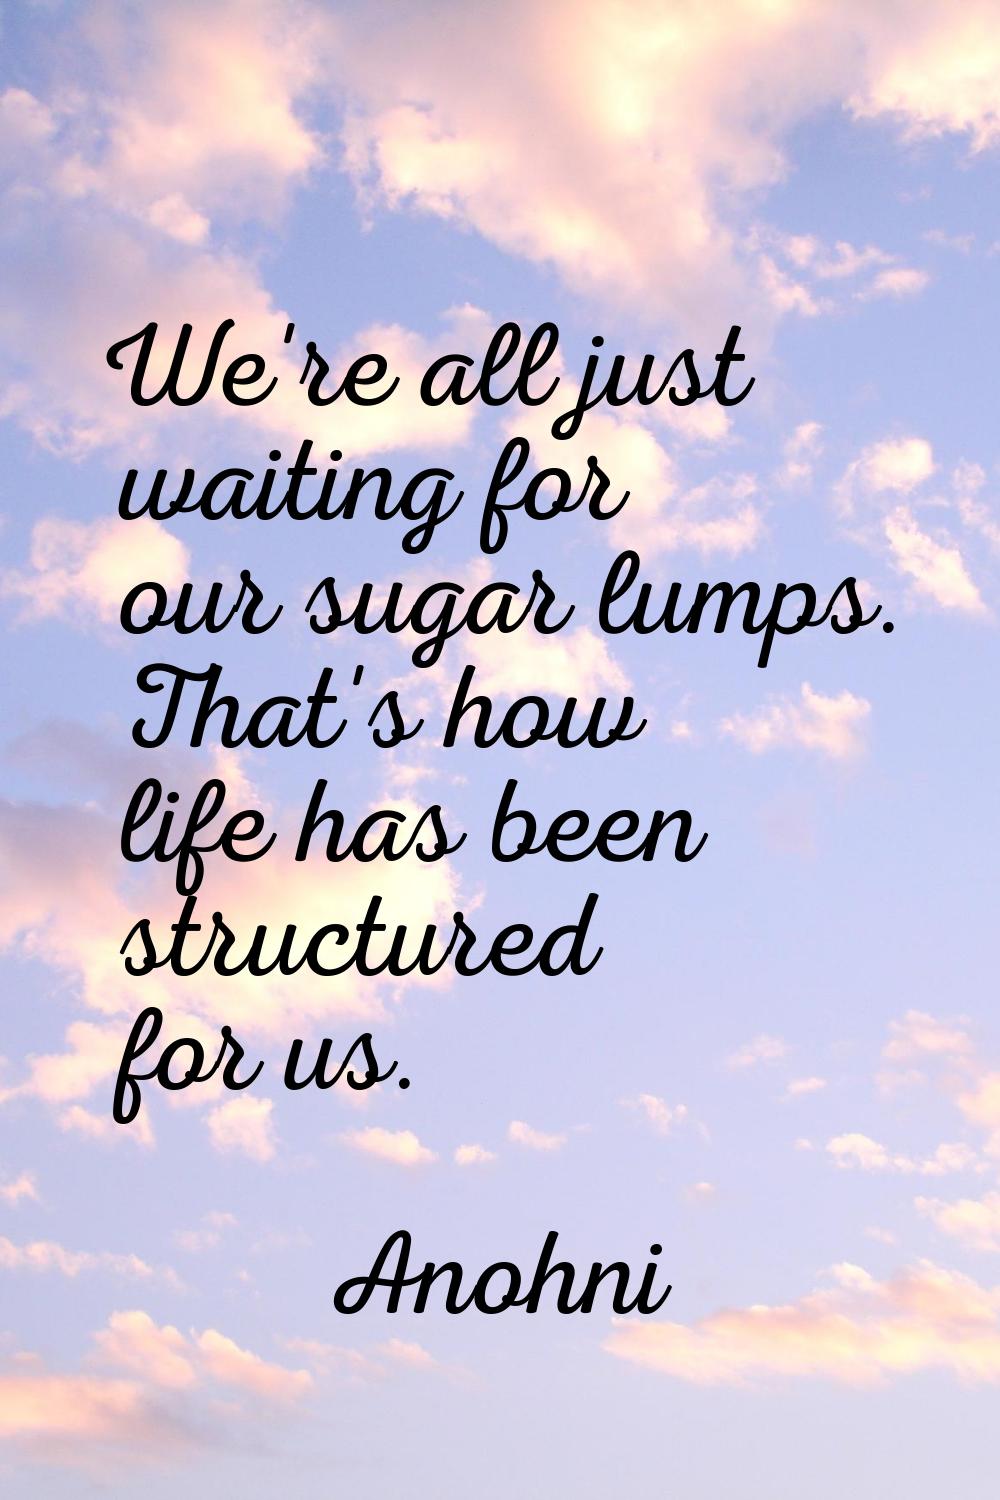 We're all just waiting for our sugar lumps. That's how life has been structured for us.